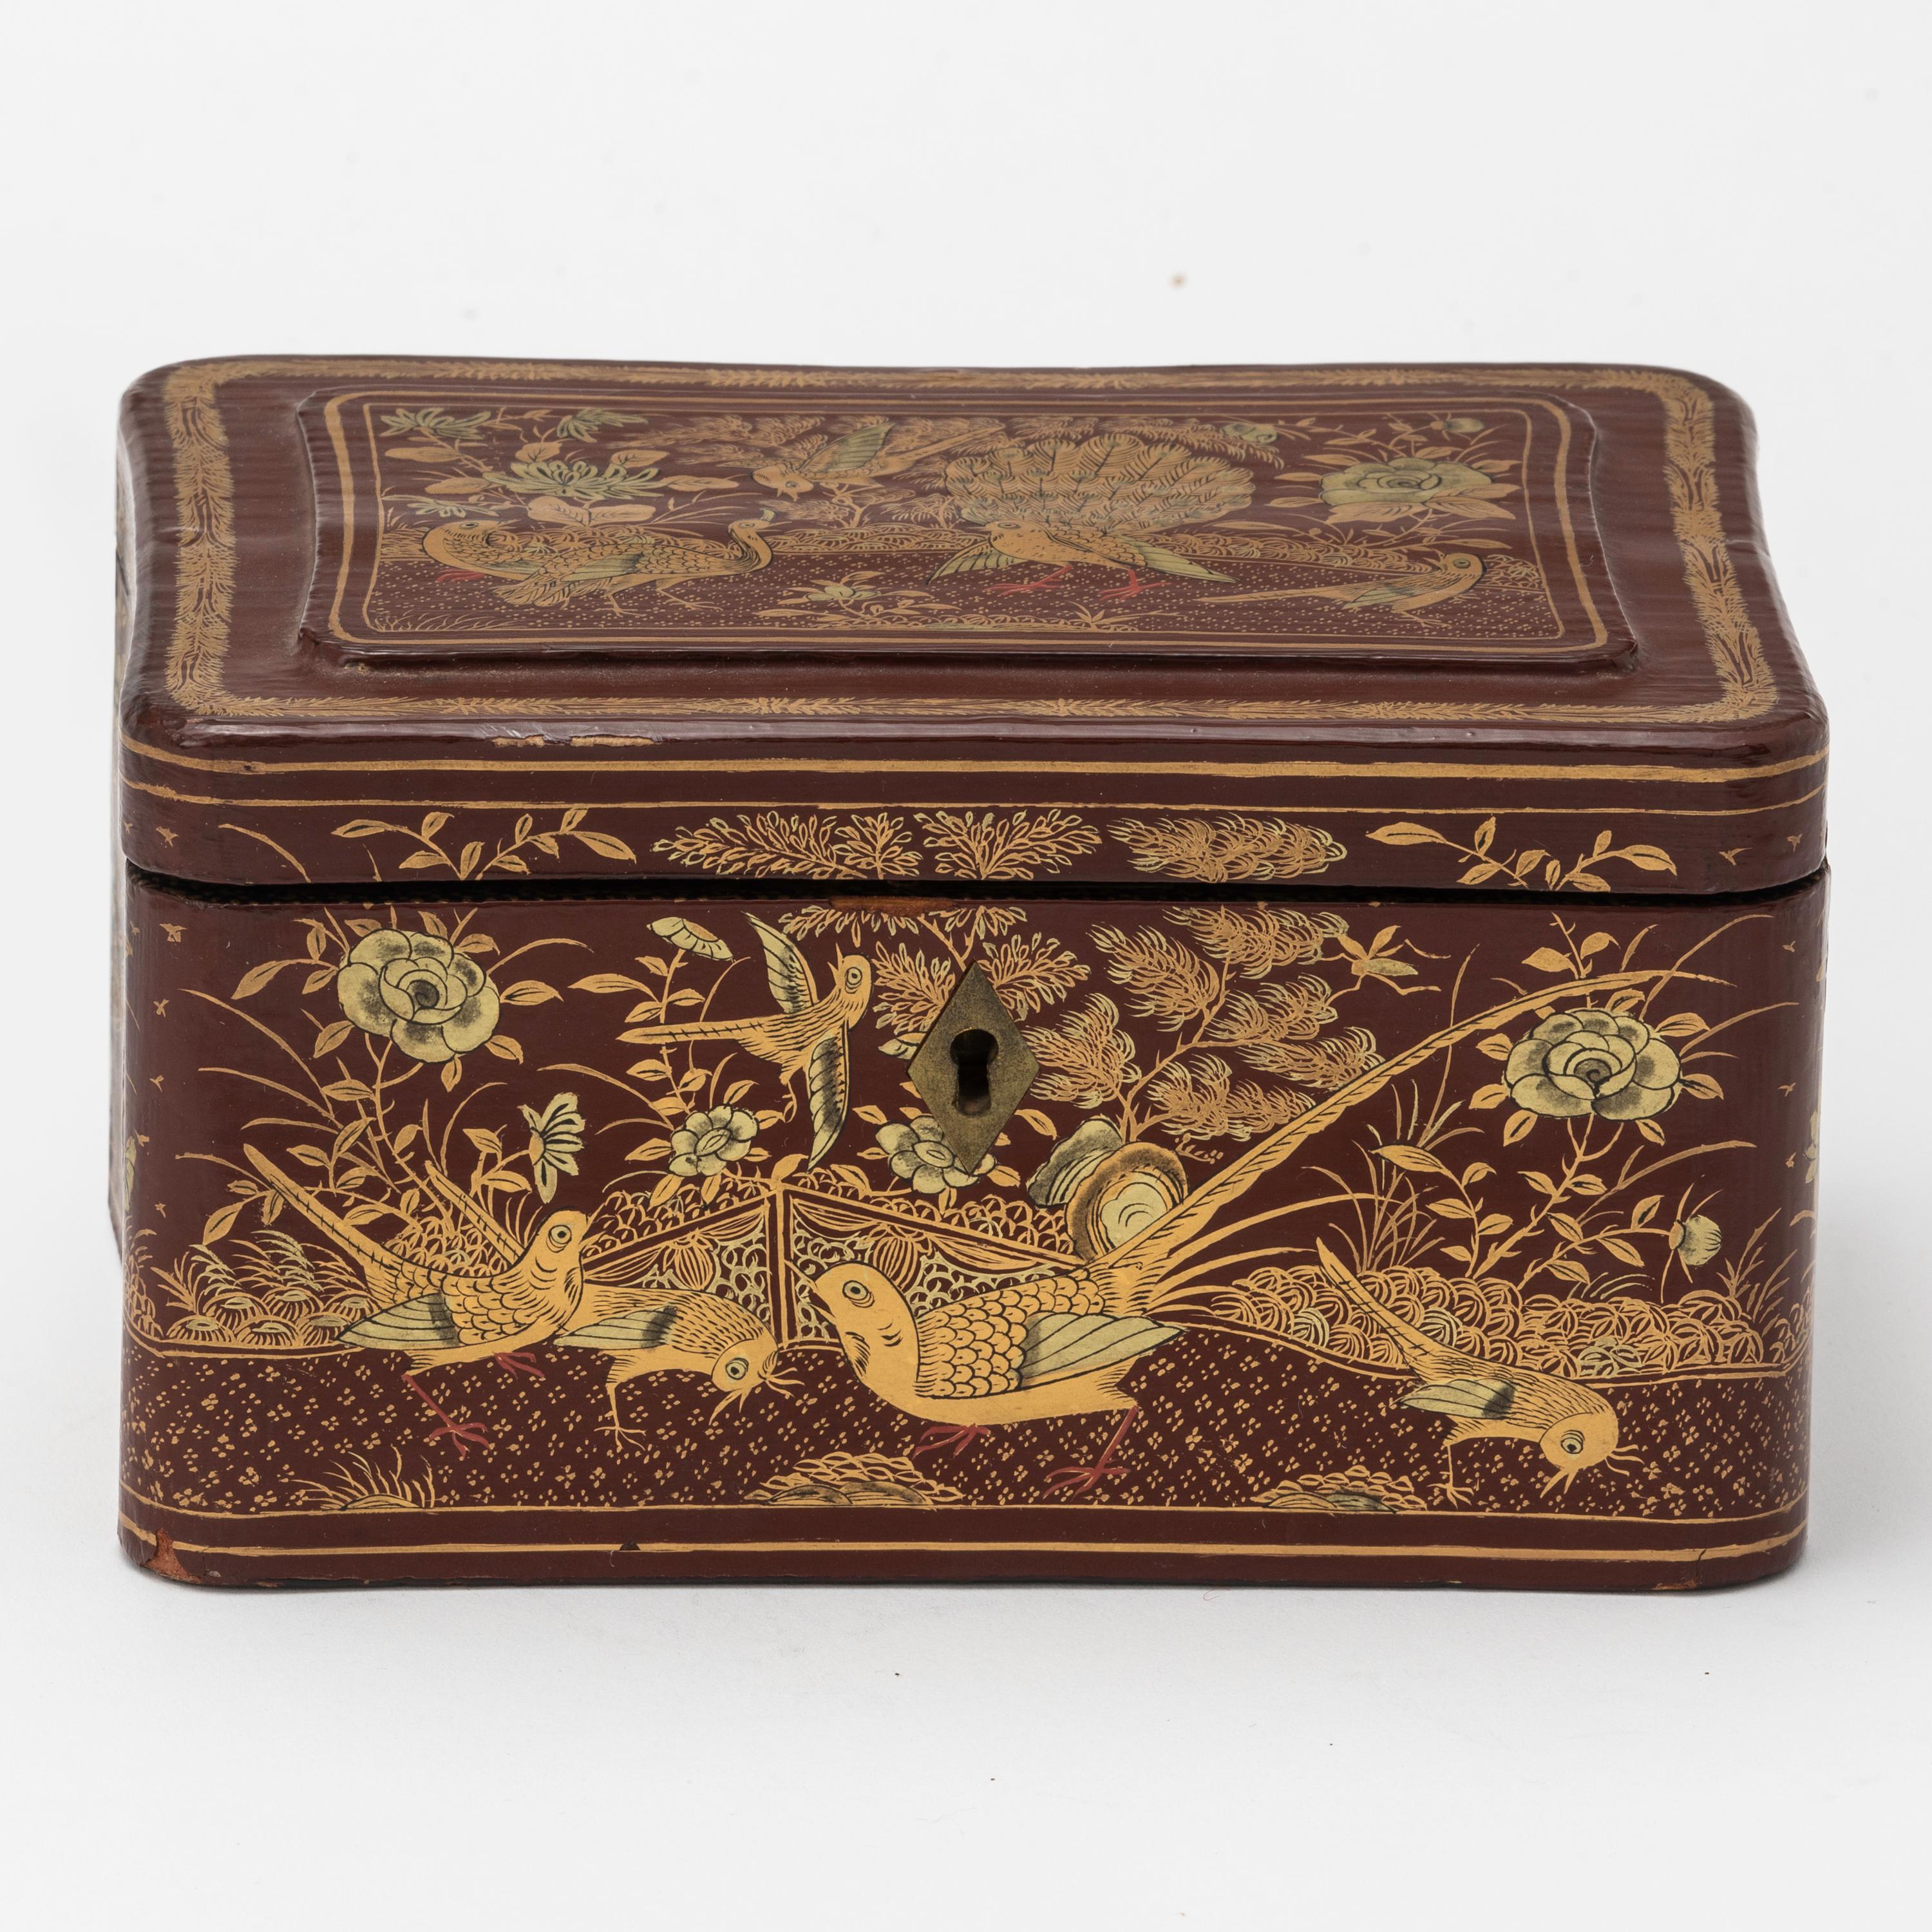 19th century lovely red lacquer tea caddy box. Hand painted in gilt chinoiserie of peacocks and birds on all sides of the box. Original liner with lid, and lock. But no key. Some loss of lacquer on edges with age and use.